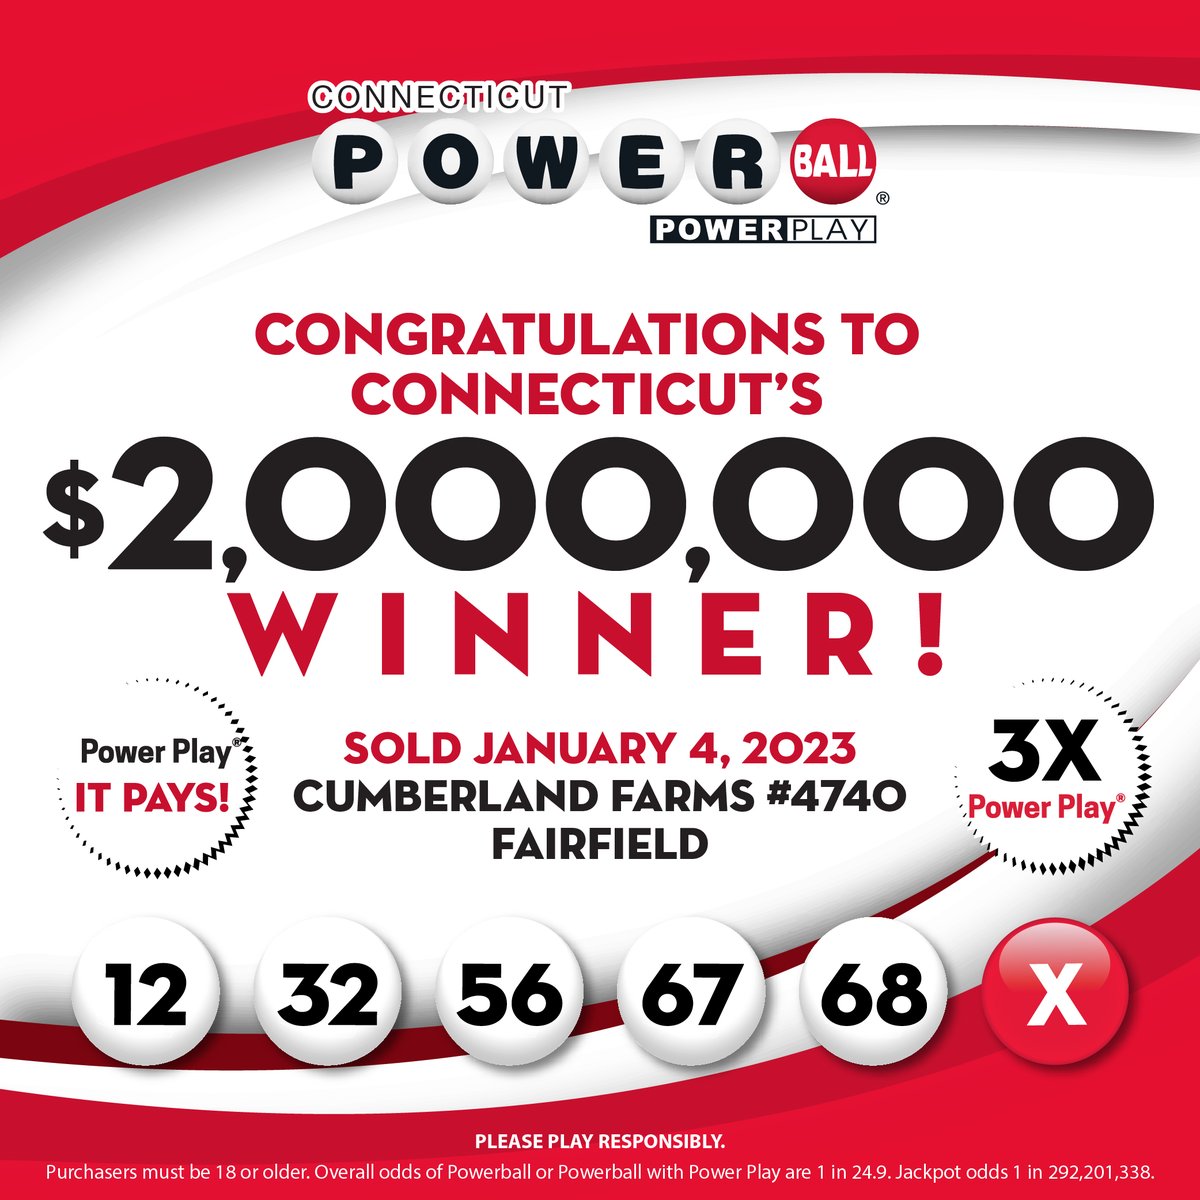 Congratulations to the Connecticut player who matched the first five numbers drawn in last night's Powerball drawing and won $2,000,000 on a winning ticket purchased at Cumberland Farms #4740, 1101 Post Rd., Fairfield! https://t.co/sip4J2JHW9